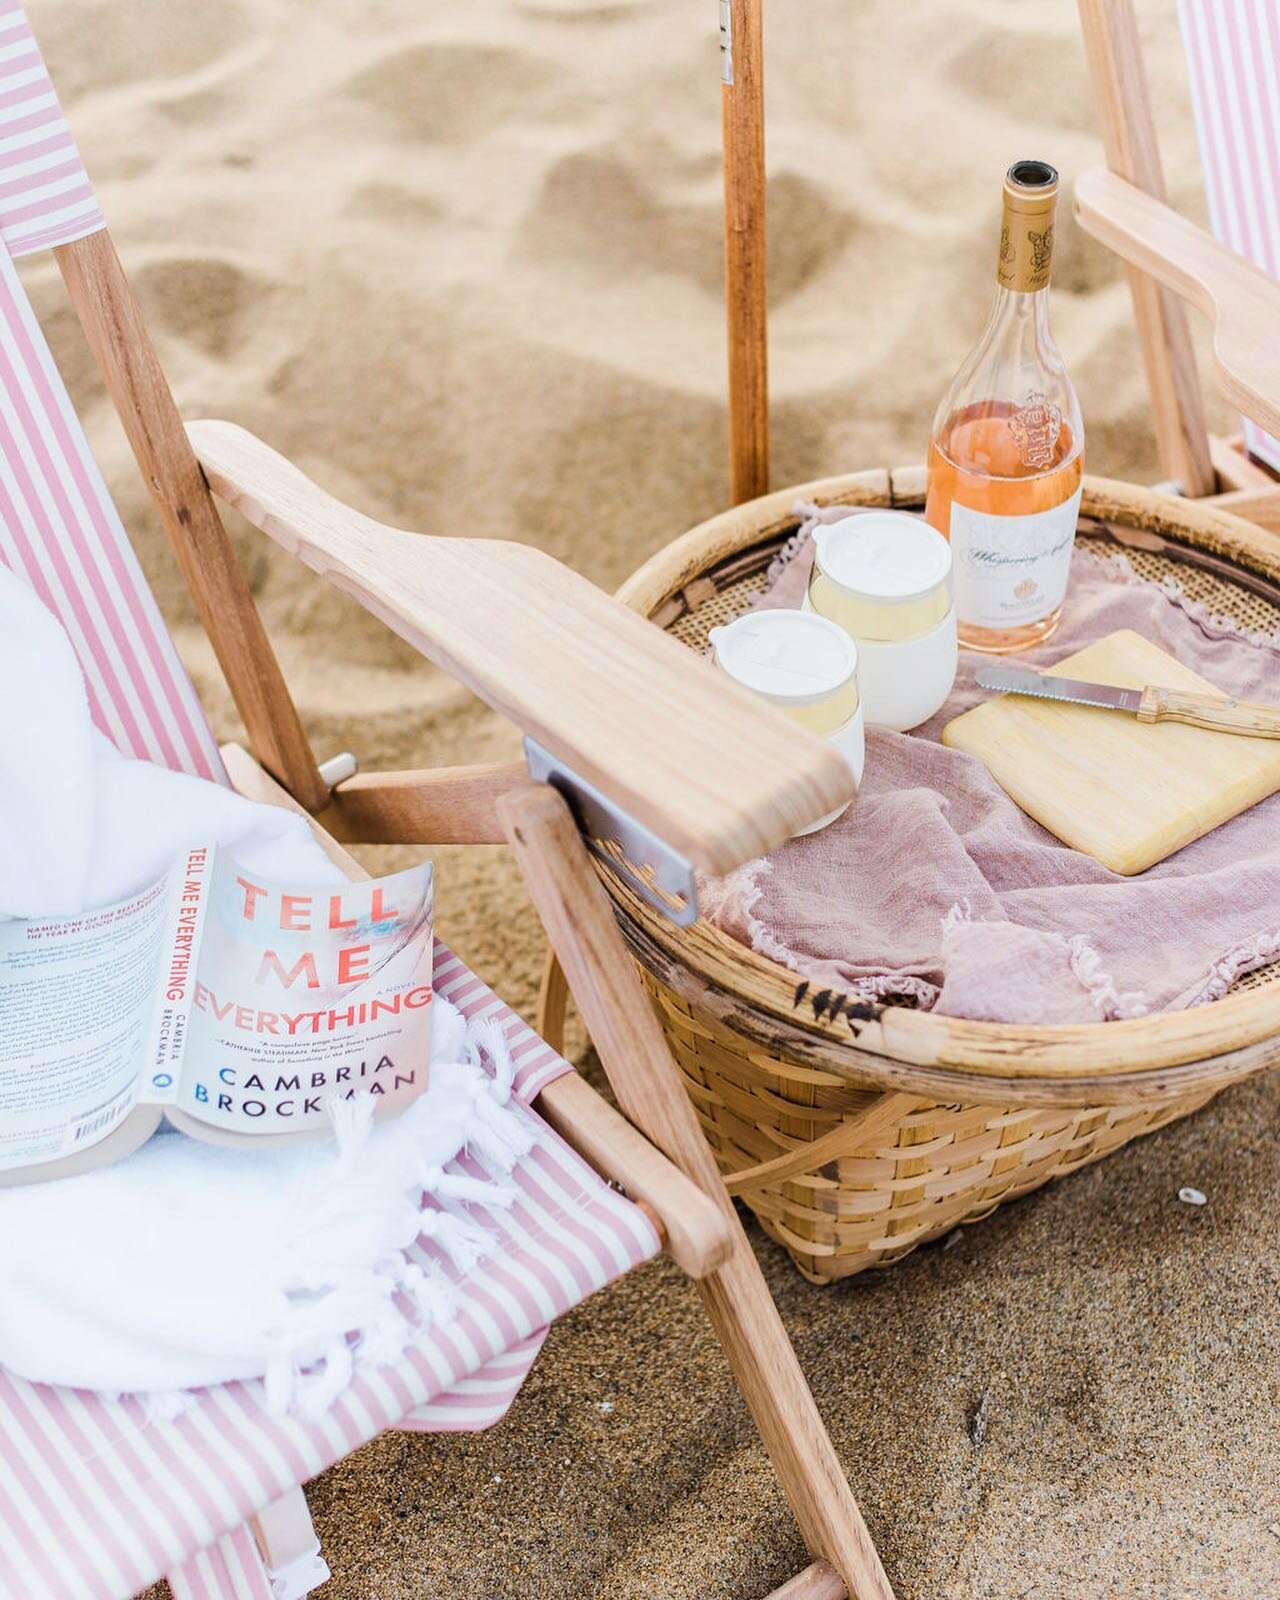 The perfect beach day does exist! Grab a book, a chair, wine, and a snack and hit the sand!  Enjoy!  Photo by @cambria_grace